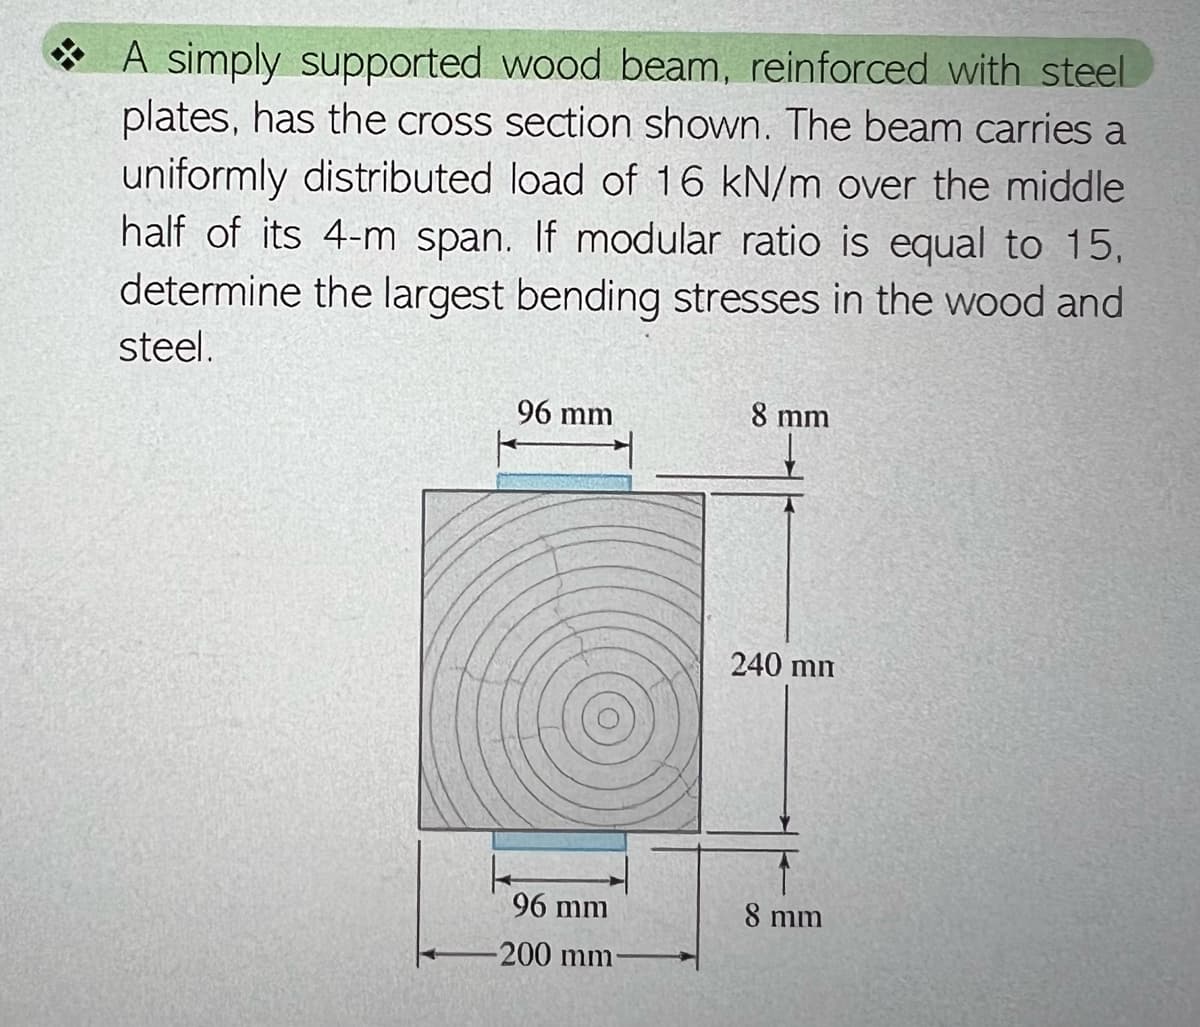 A simply supported wood beam, reinforced with steel
plates, has the cross section shown. The beam carries a
uniformly distributed load of 16 kN/m over the middle
half of its 4-m span. If modular ratio is equal to 15,
determine the largest bending stresses in the wood and
steel.
96 mm
96 mm
-200 mm
8 mm
240 mn
8 mm